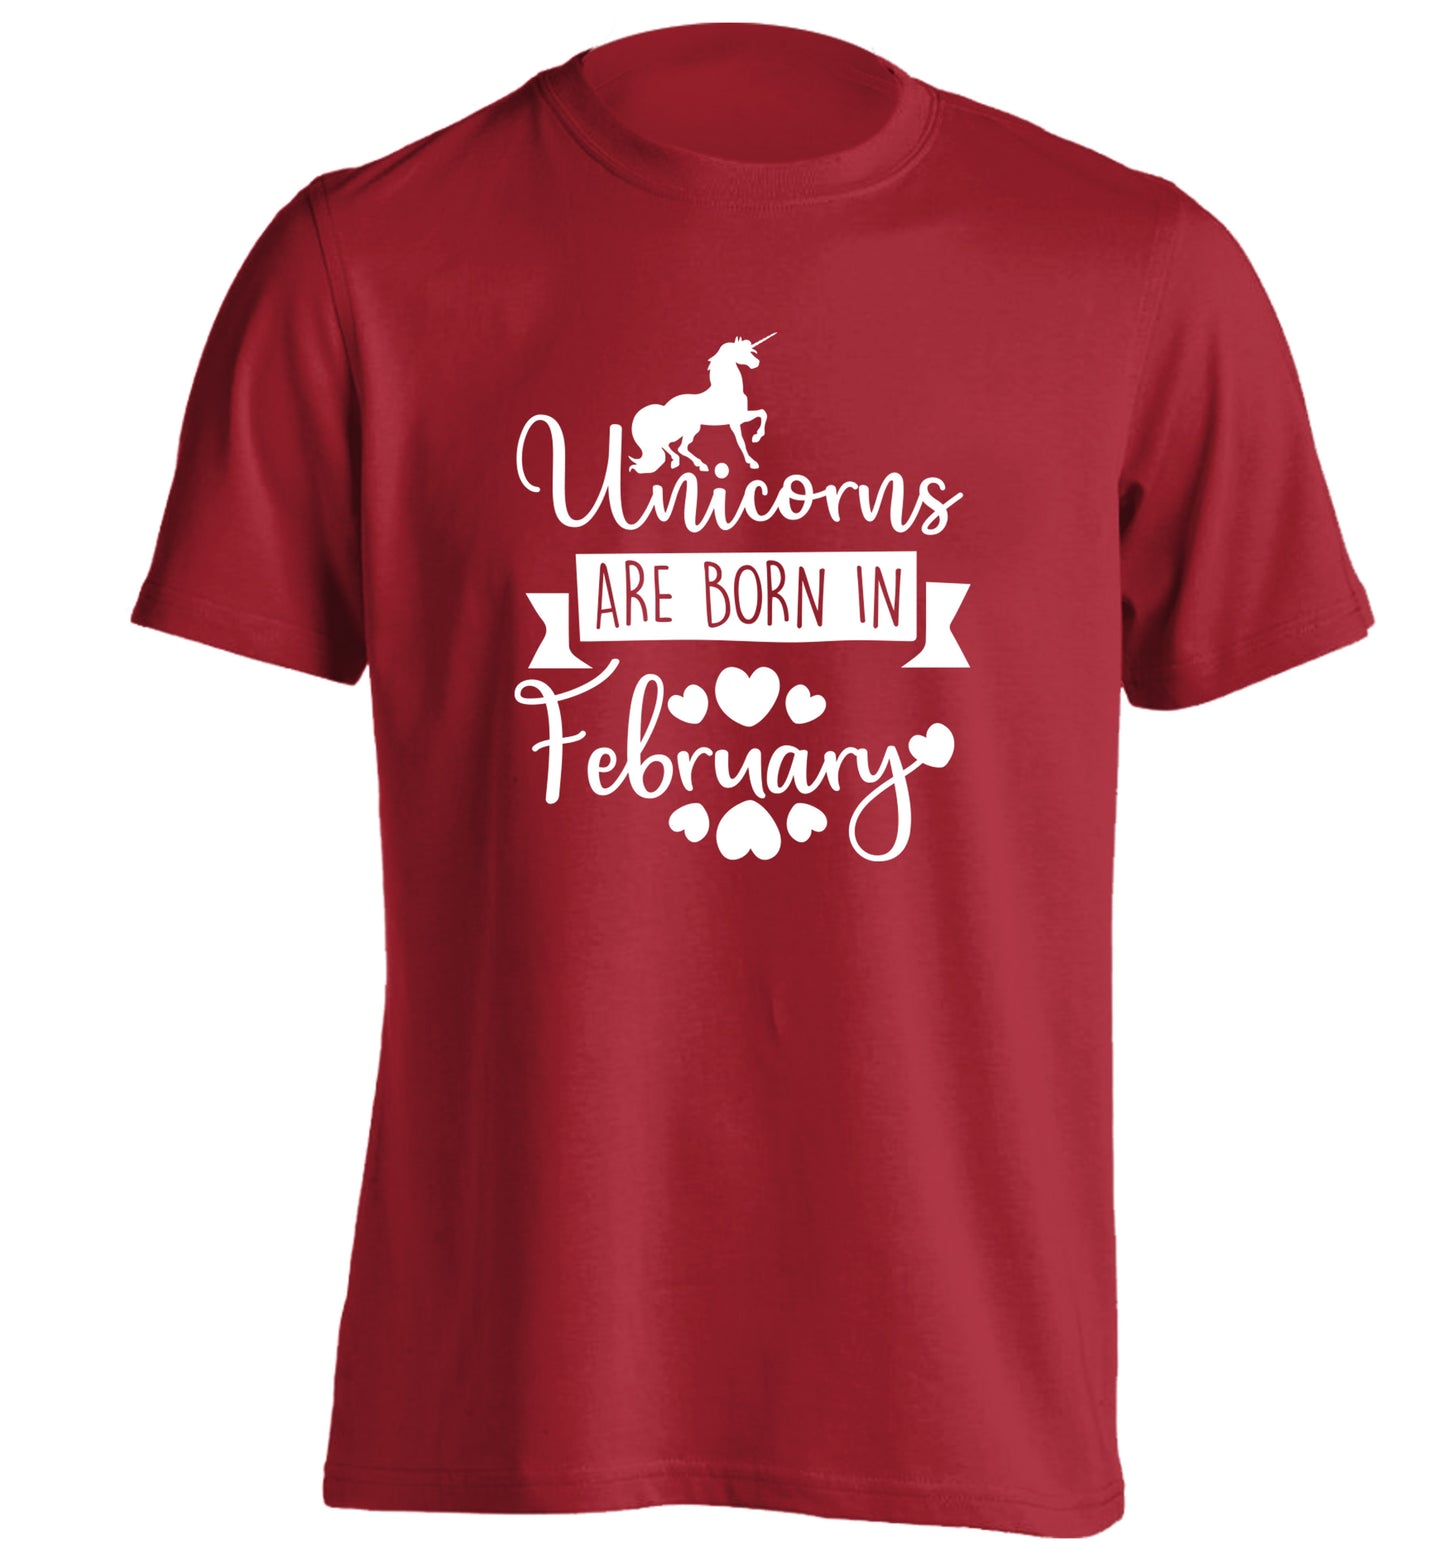 Unicorns are born in February adults unisex red Tshirt 2XL